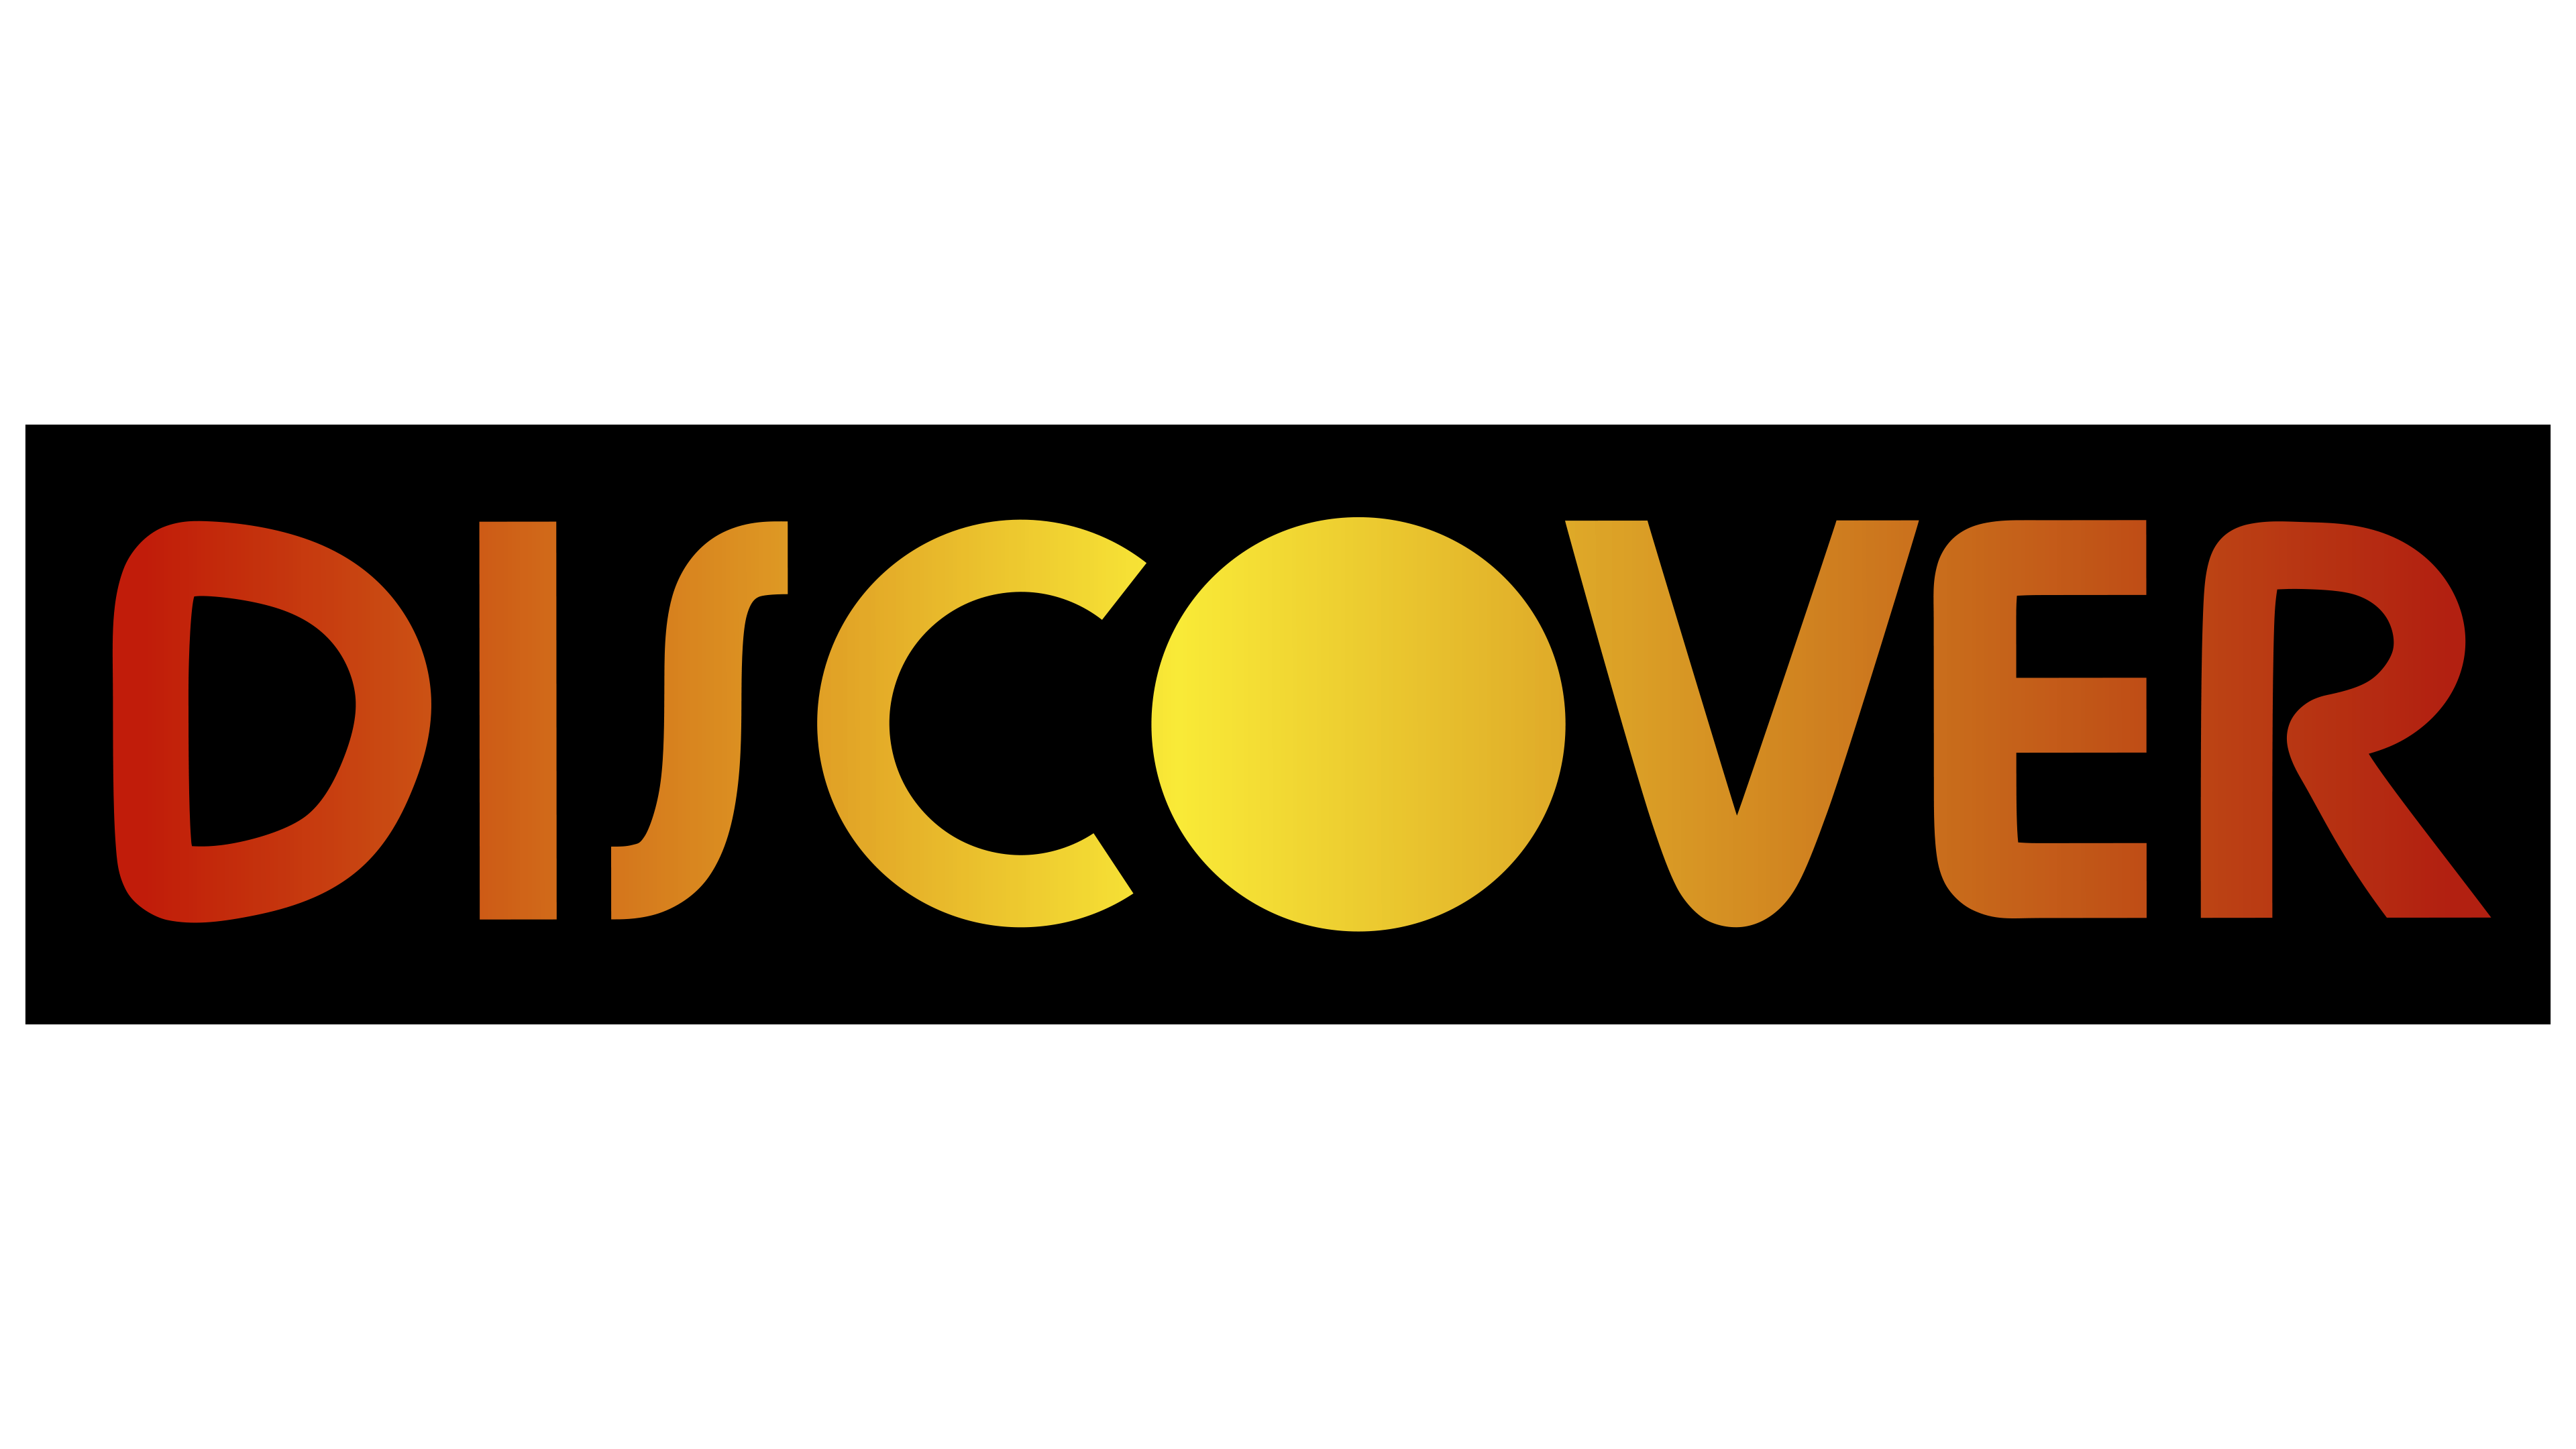 Discover Logo PNG Picture